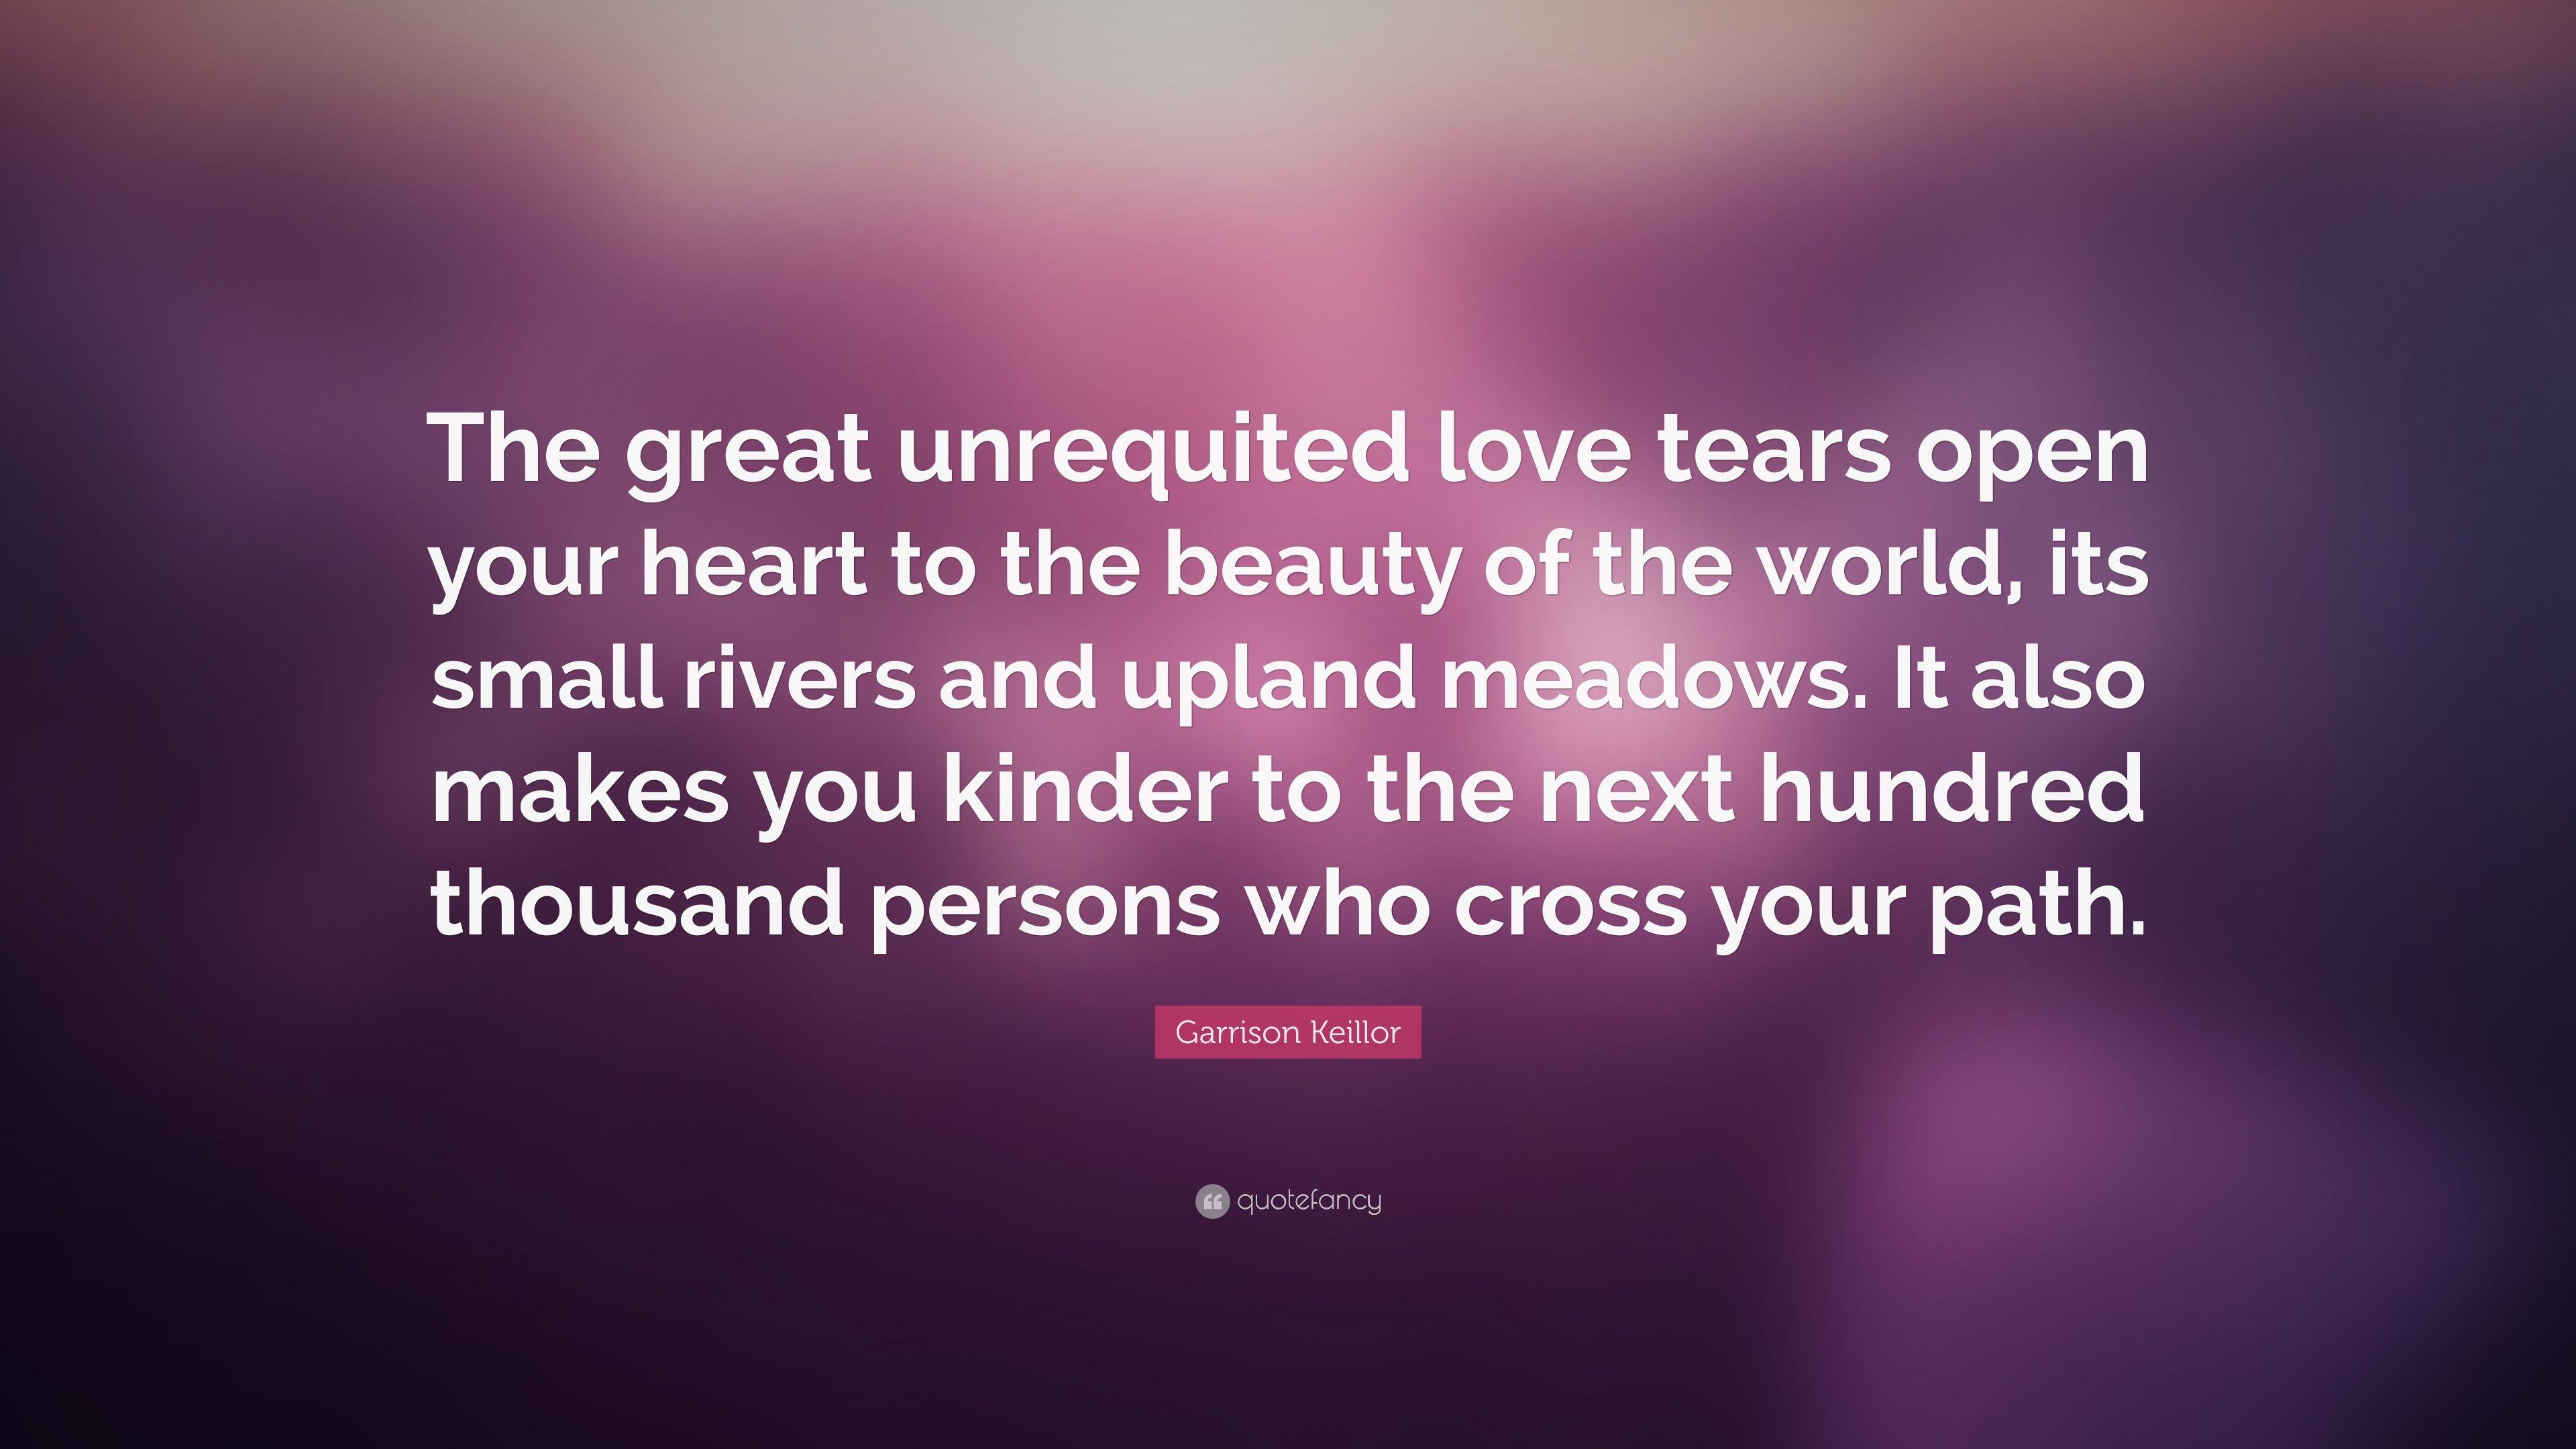 Garrison Keillor Quote: “The great unrequited love tears open your